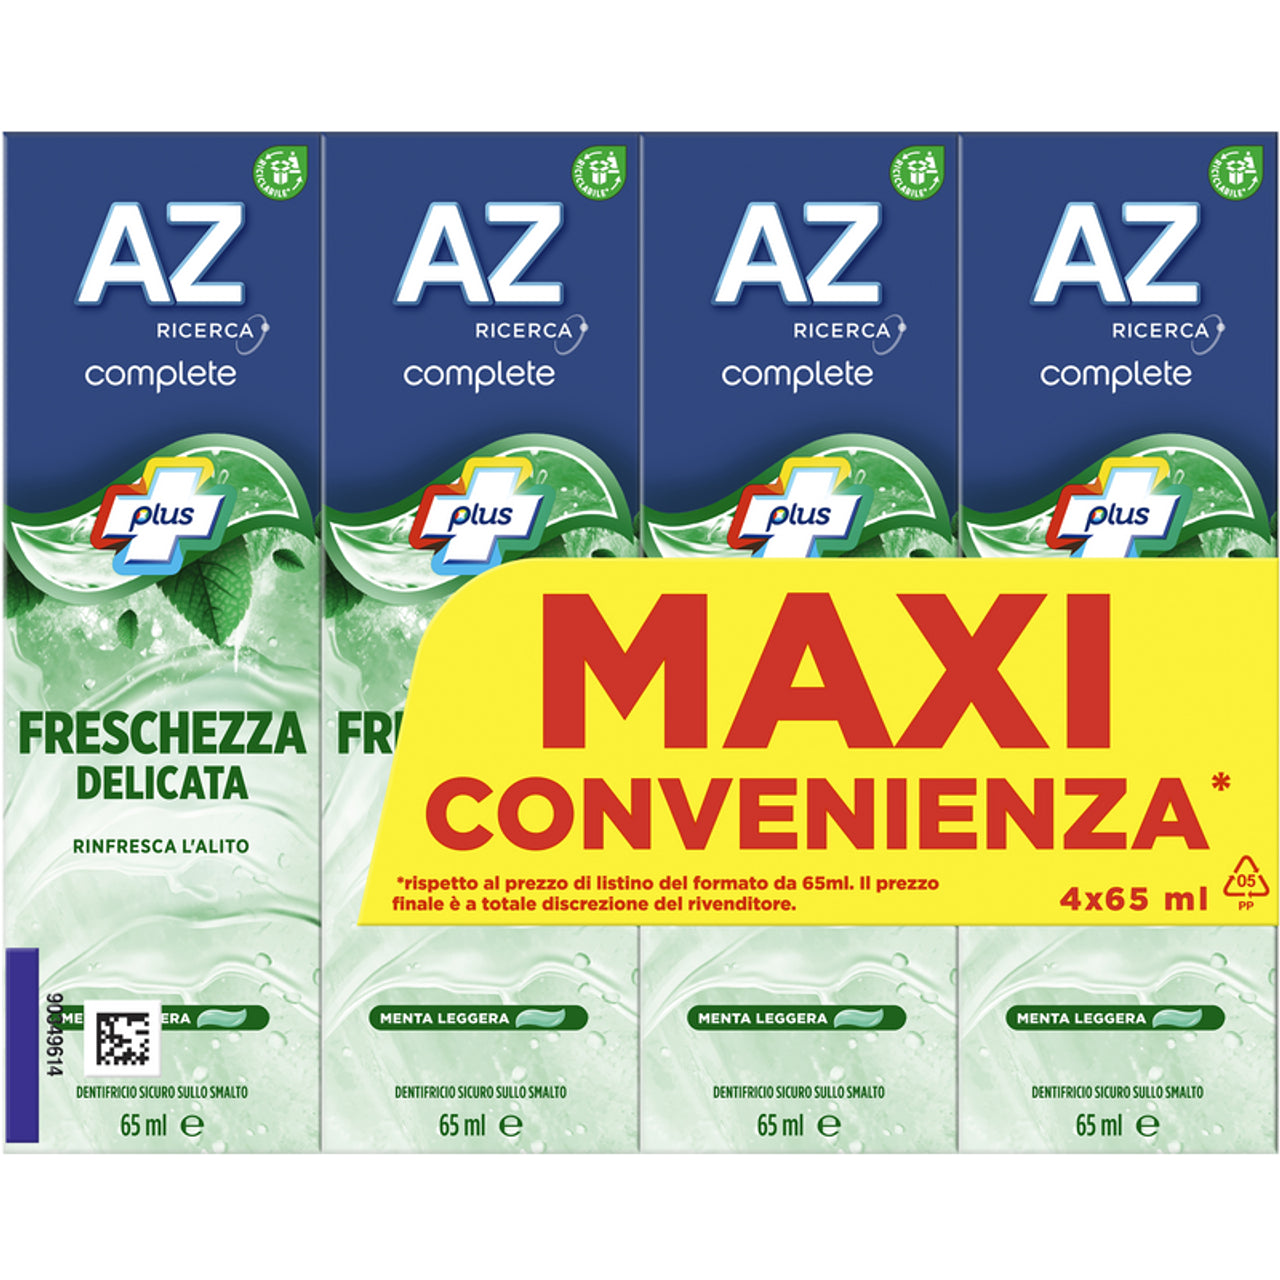 Az toothpaste complete delicate freshness light mint 4 pieces of 65 ml